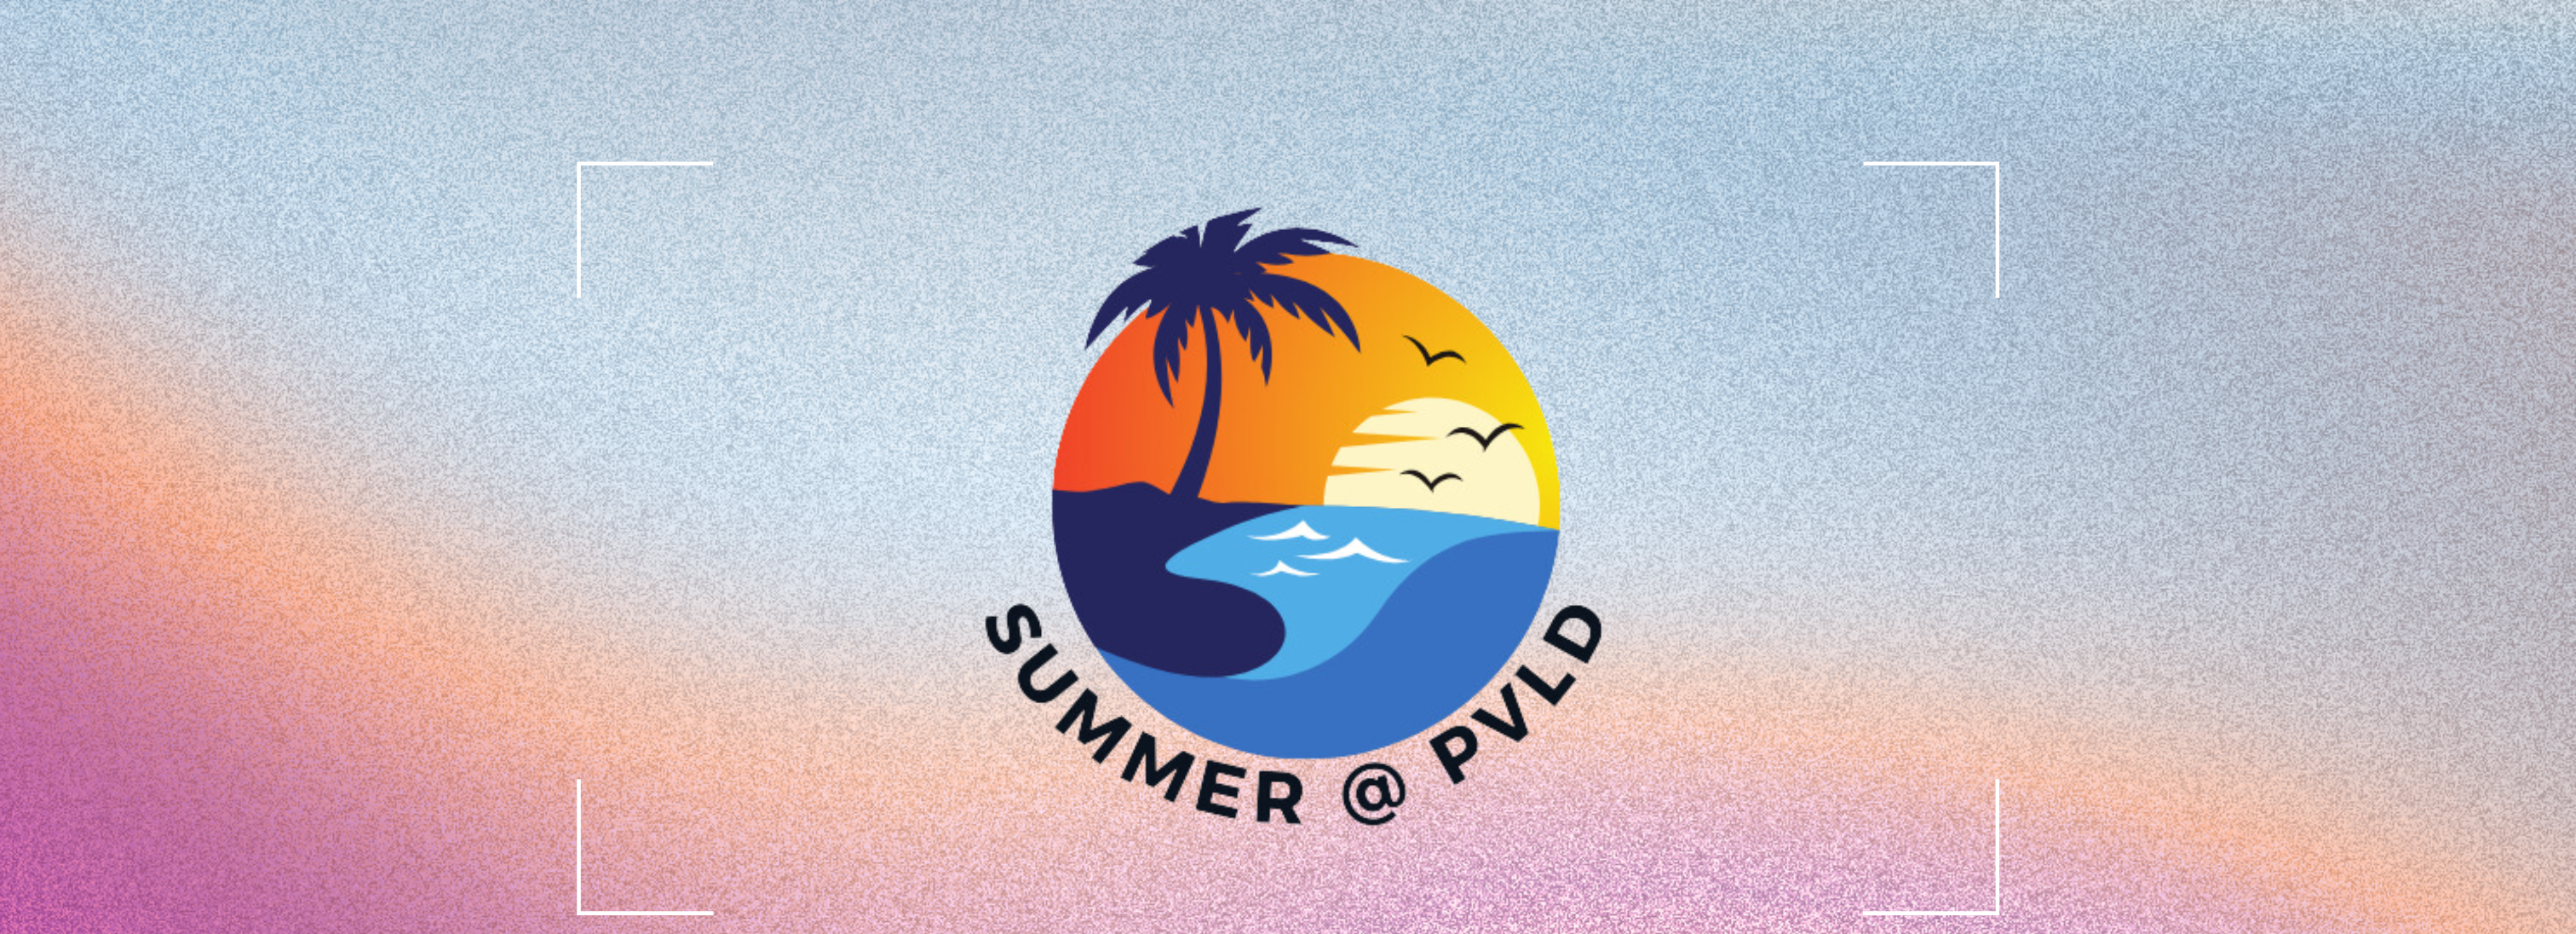 Summer @ PVLD slider for page